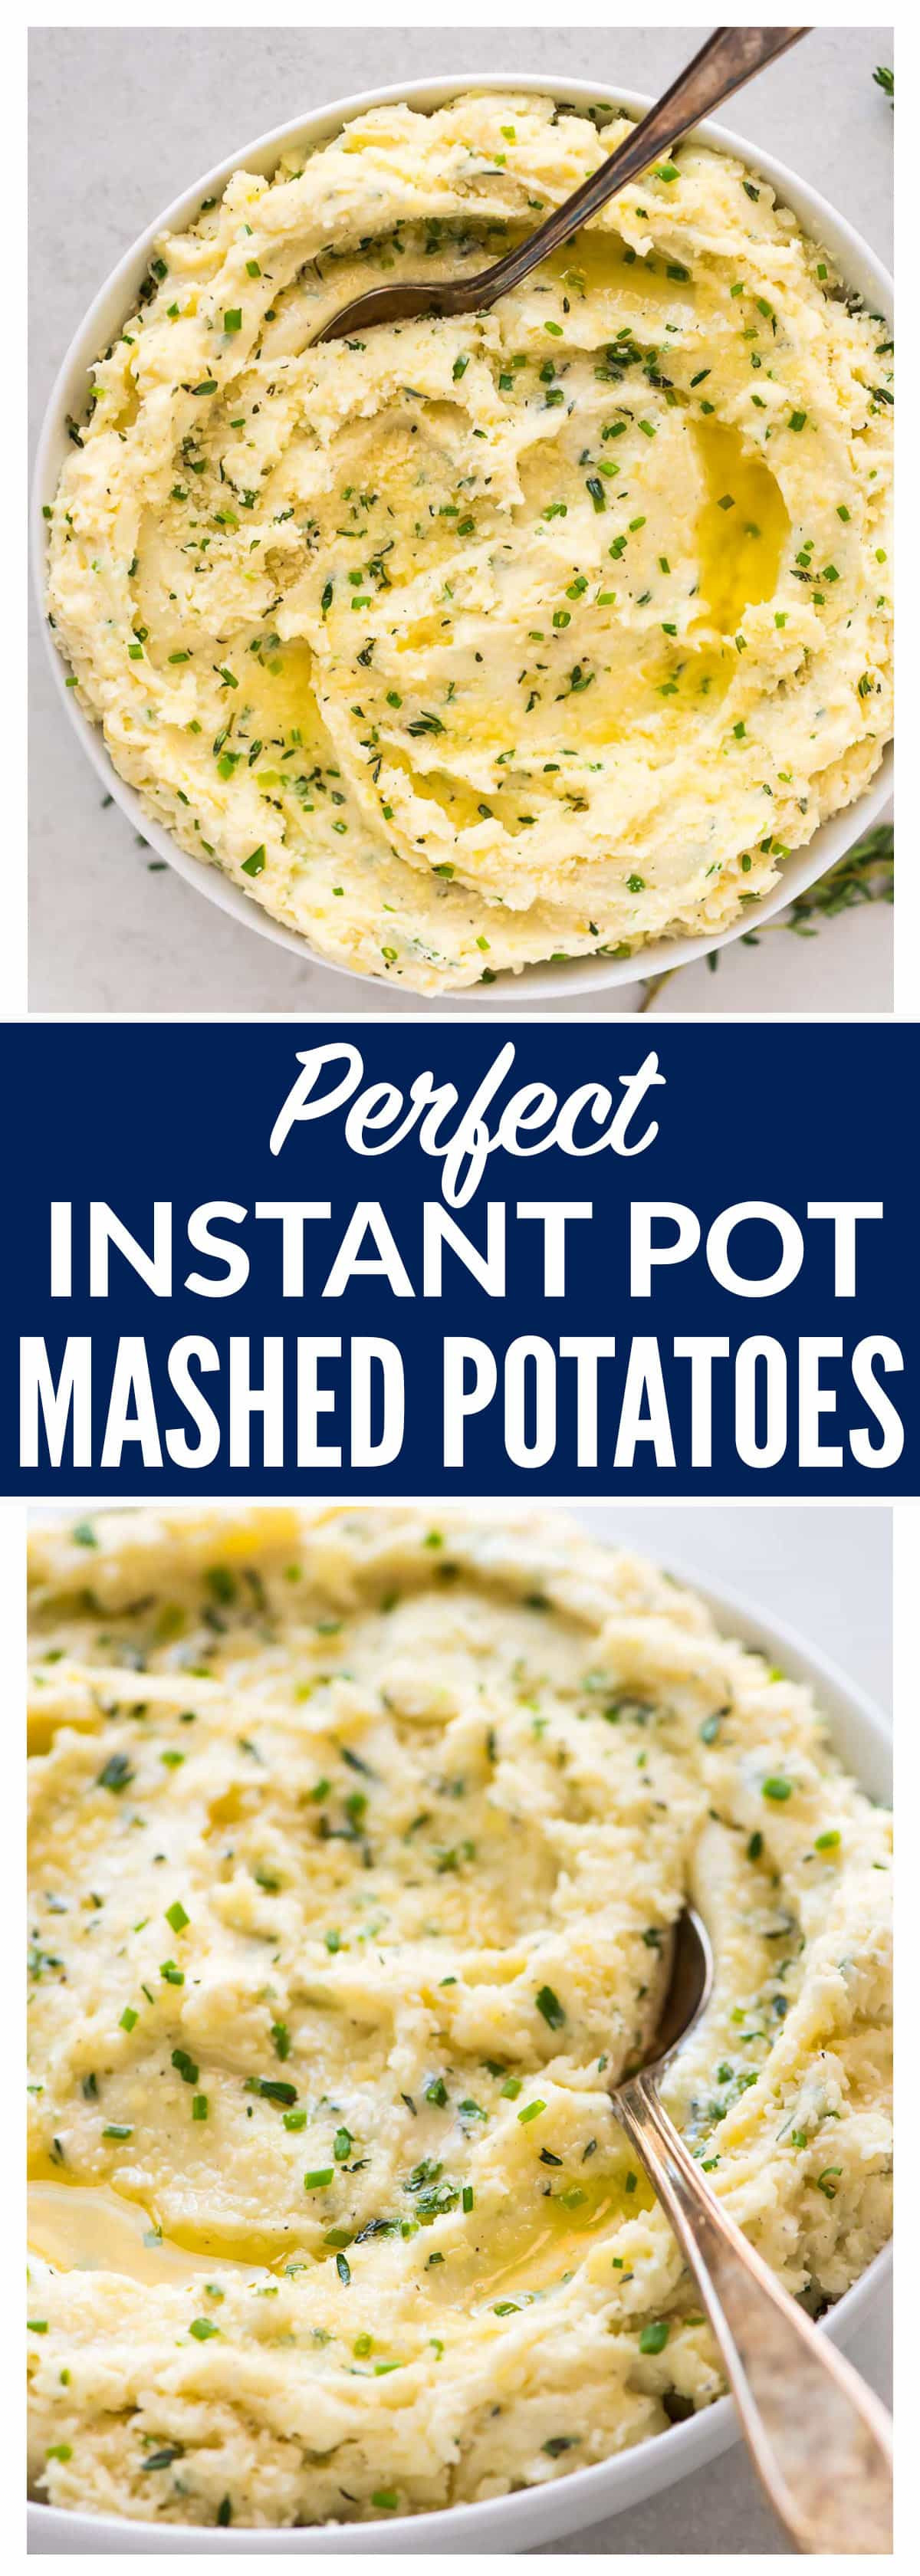 Instant Mashed Potatoes Recipe
 instant mashed potatoes directions